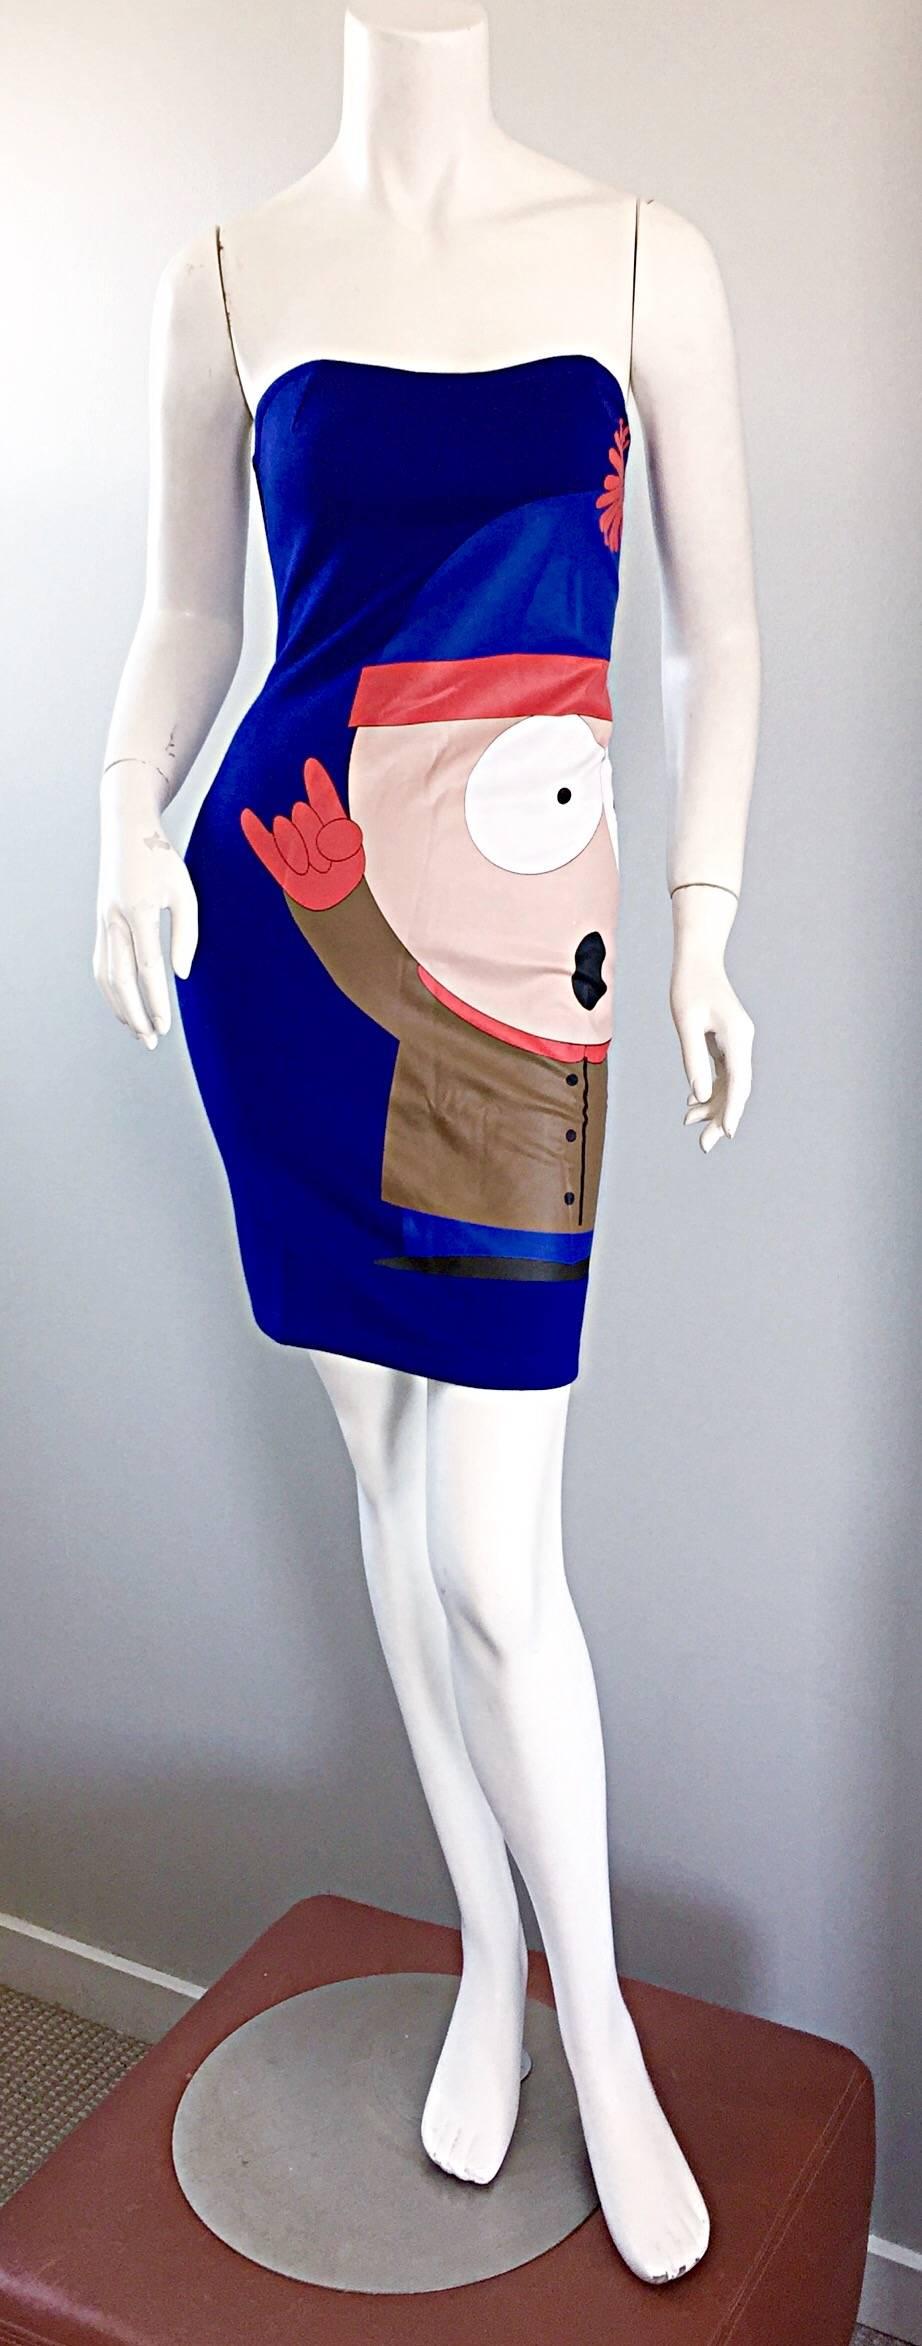 Statement ready JEAN CHARLES DE CASTELJABAC "South Park" strapless dress! Vibrant royal blue color with an oversized image of Stan on the side. Chic silver exposed zipper up the back. Soft cotton stretches to fit and flatter the body. In